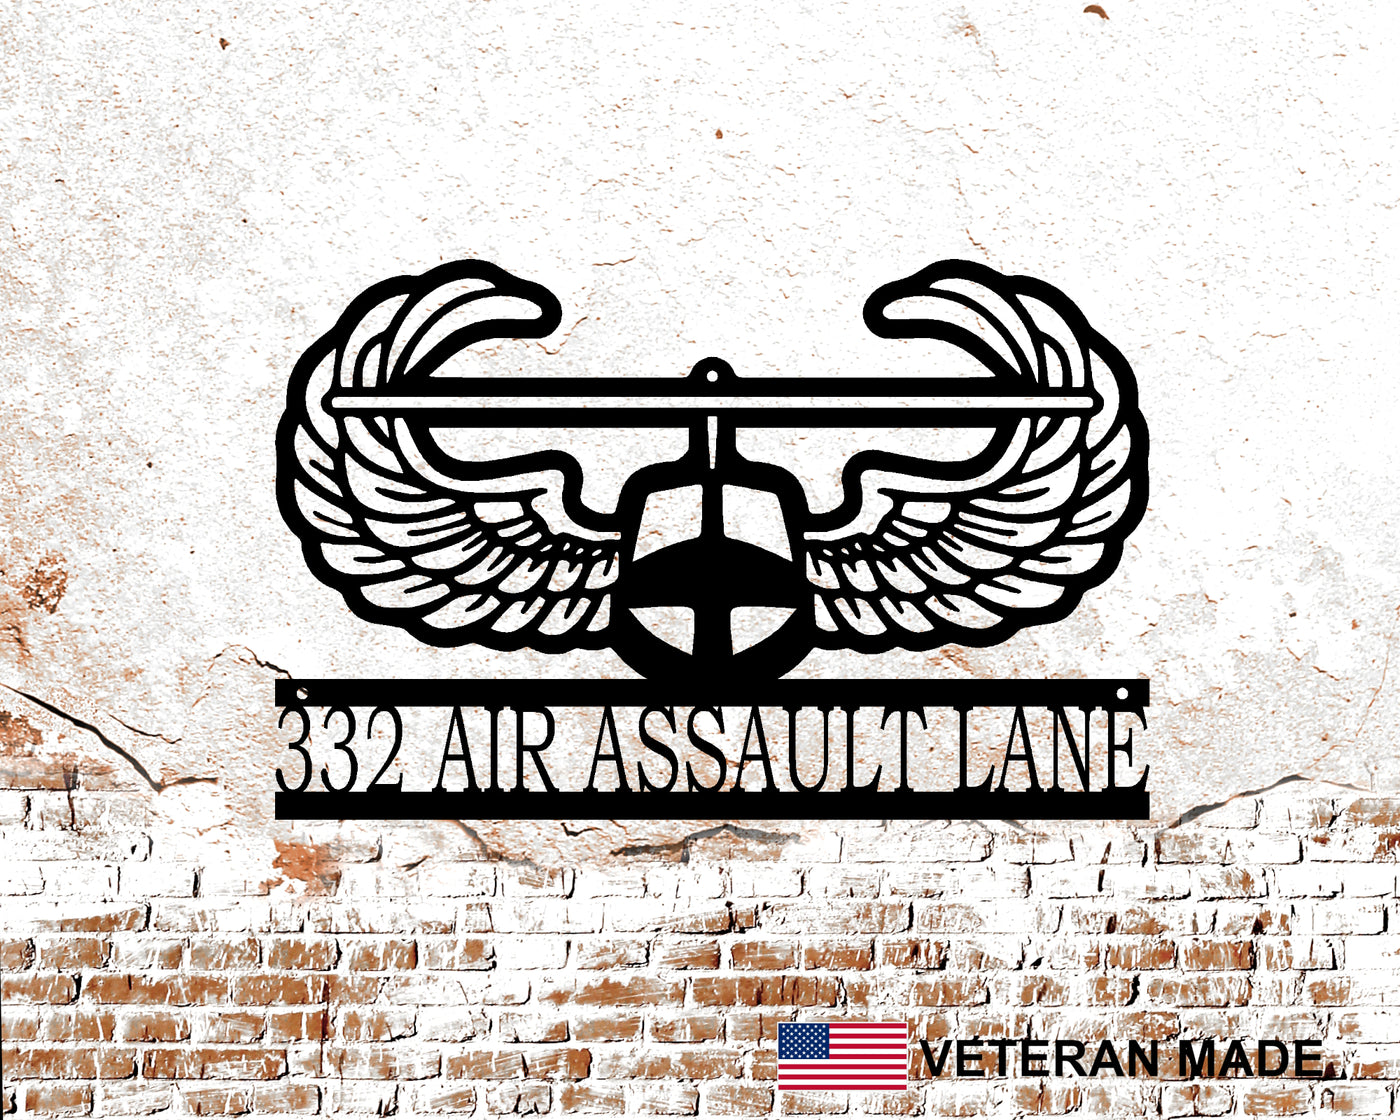 Personalized Air Assault Wings Metal Sign with Rank and Name - Madison Iron and Wood - Personalized sign - metal outdoor decor - Steel deocrations - american made products - veteran owned business products - fencing decorations - fencing supplies - custom wall decorations - personalized wall signs - steel - decorative post caps - steel post caps - metal post caps - brackets - structural brackets - home improvement - easter - easter decorations - easter gift - easter yard decor